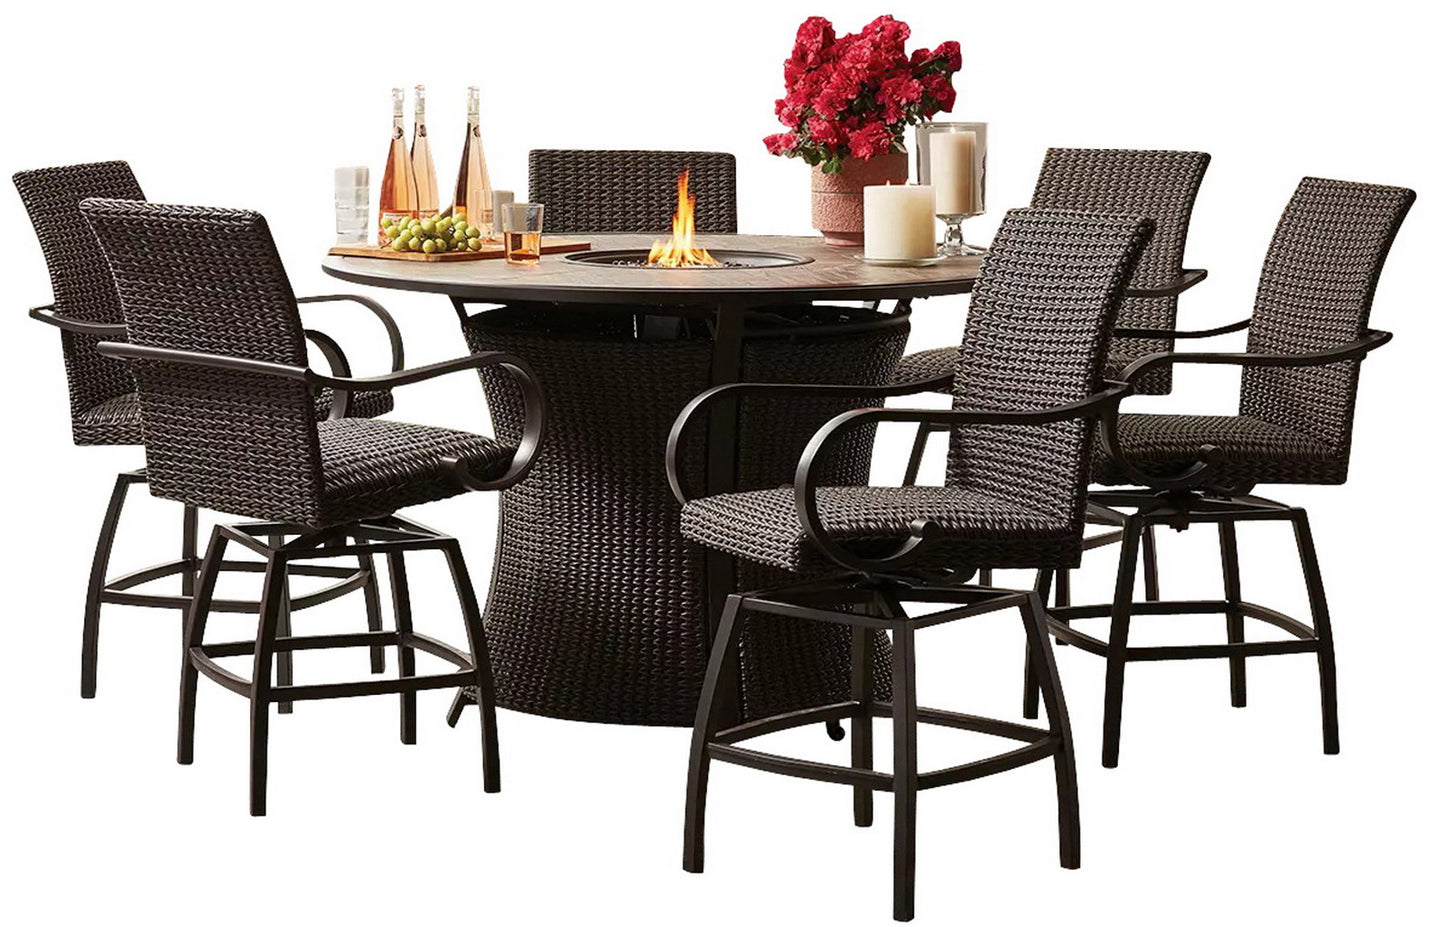 Agio Outdoor Furniture and Fire Pit 7 Piece Set Counter Height 6 Swivel Chairs